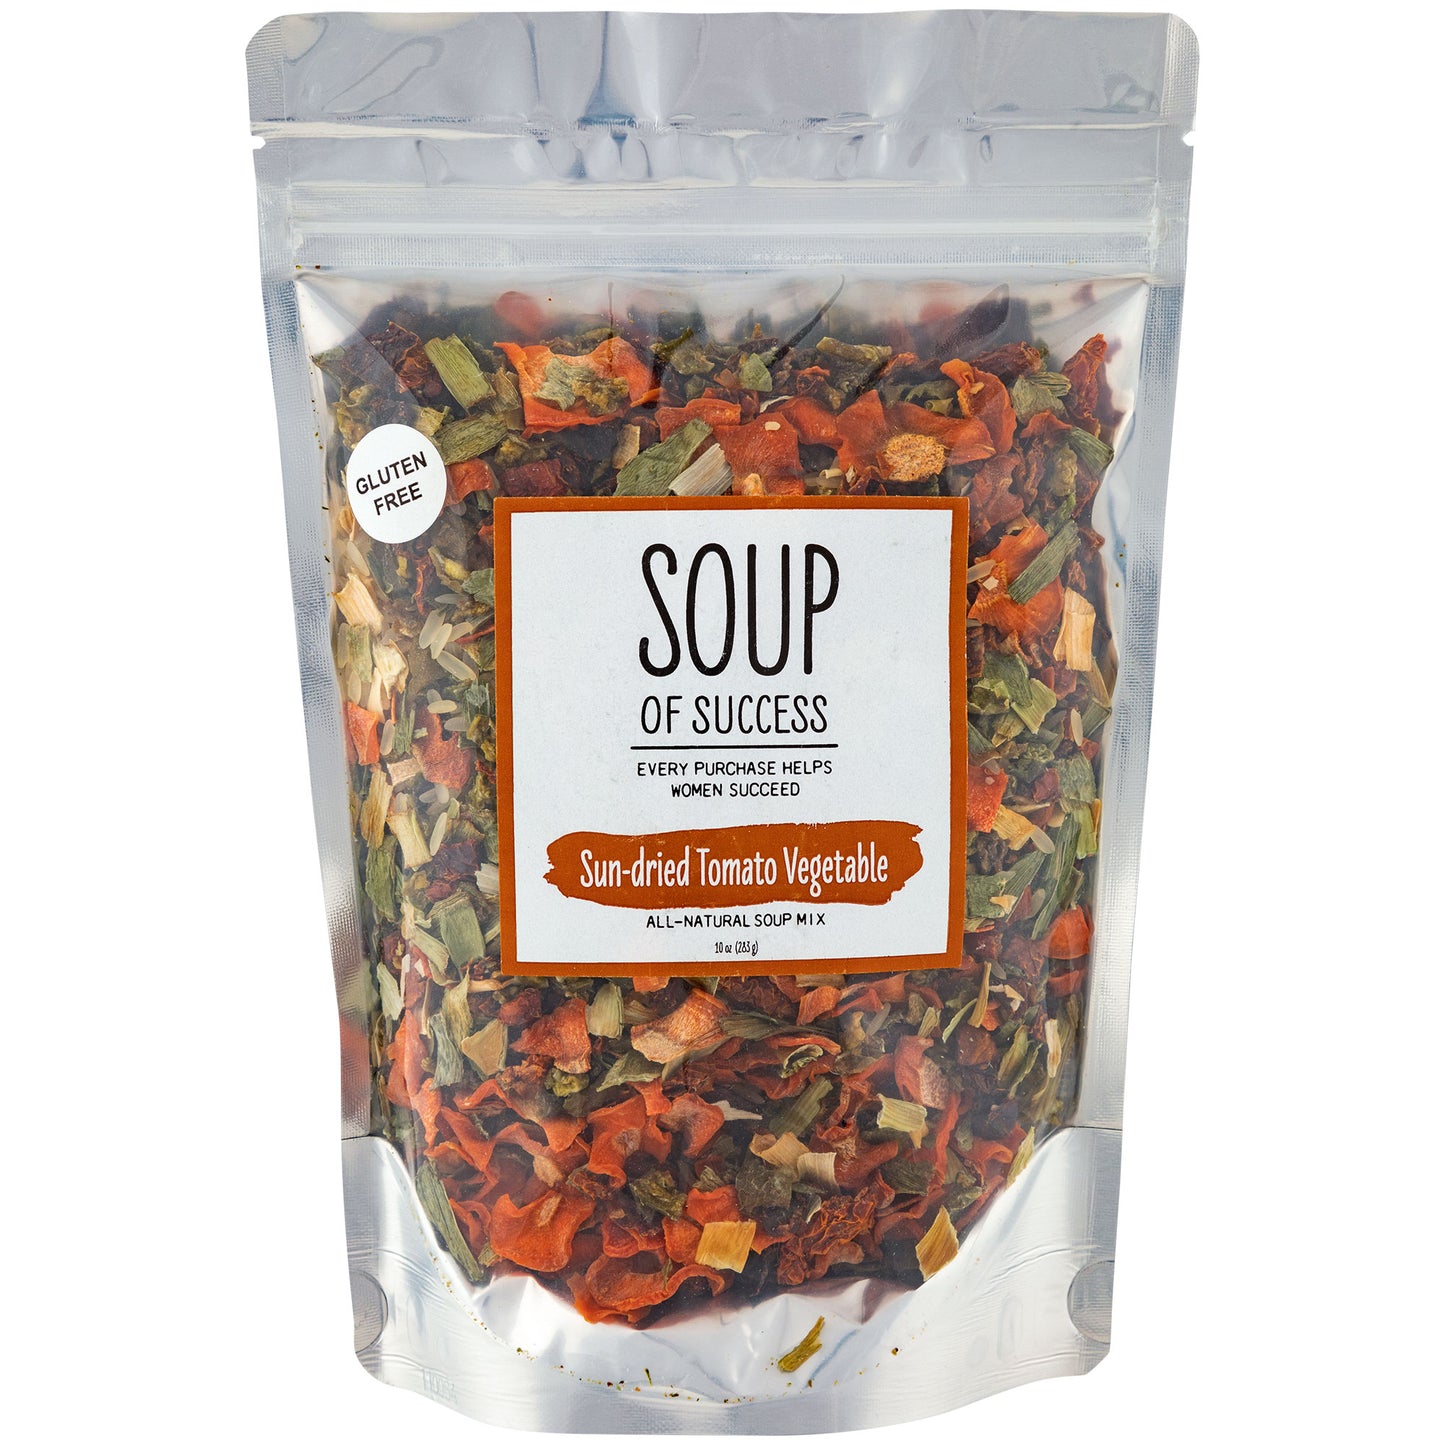 Sun-dried Tomato Vegetable Soup Mix